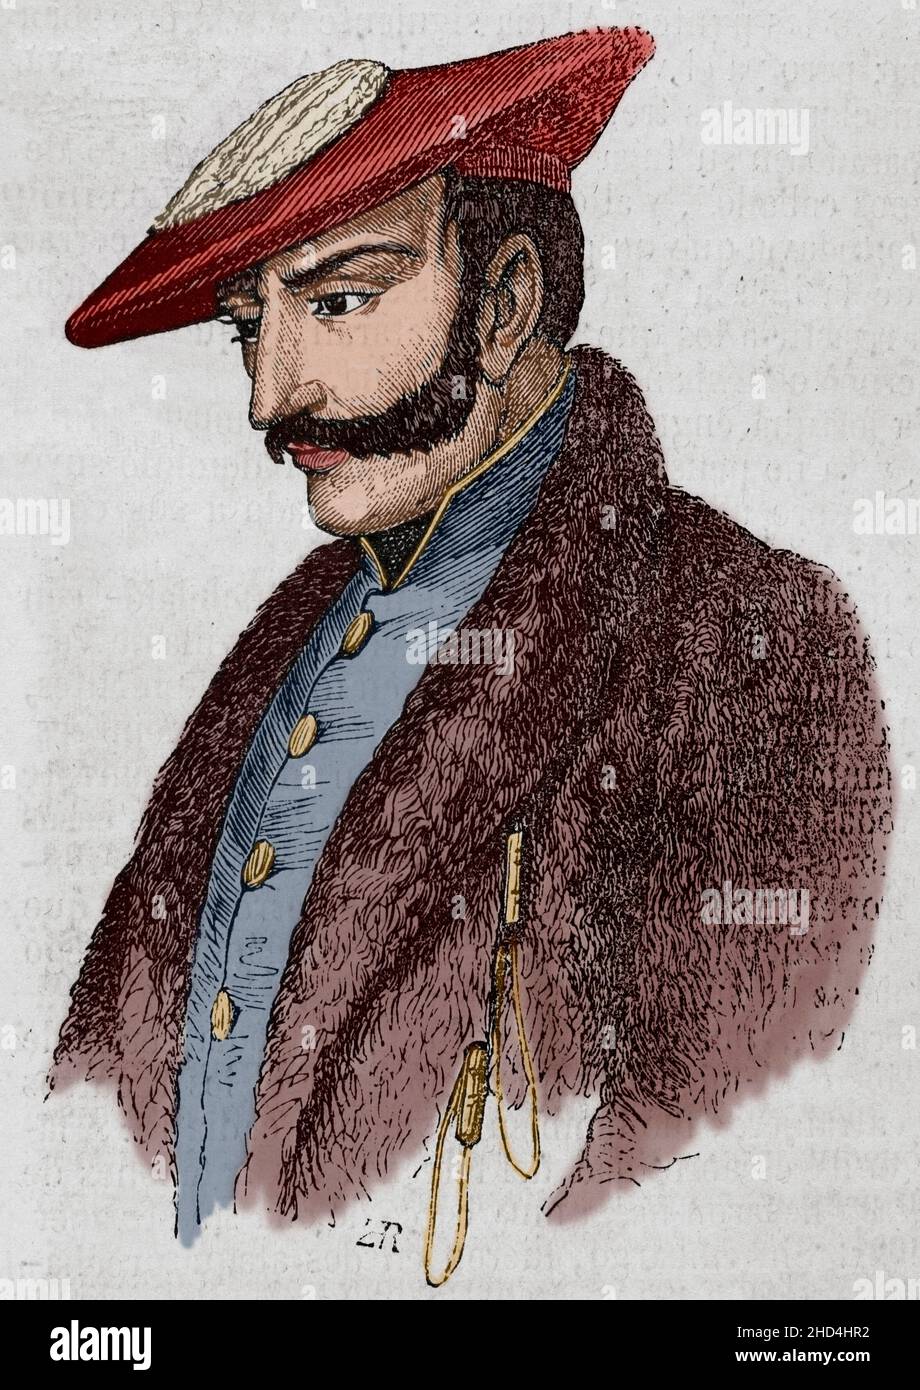 Tomás Zumalacárregui (1788-1835). Spanish military. At the outbreak of the First Carlist War (1833-1840) he joined the army of the pretender Don Carlos, reaching the rank of general. He died during the siege of the city of Bilbao. Portrait. Engraving. Later colouration. Historia General de España by Father Mariana. Madrid, 1853. Stock Photo